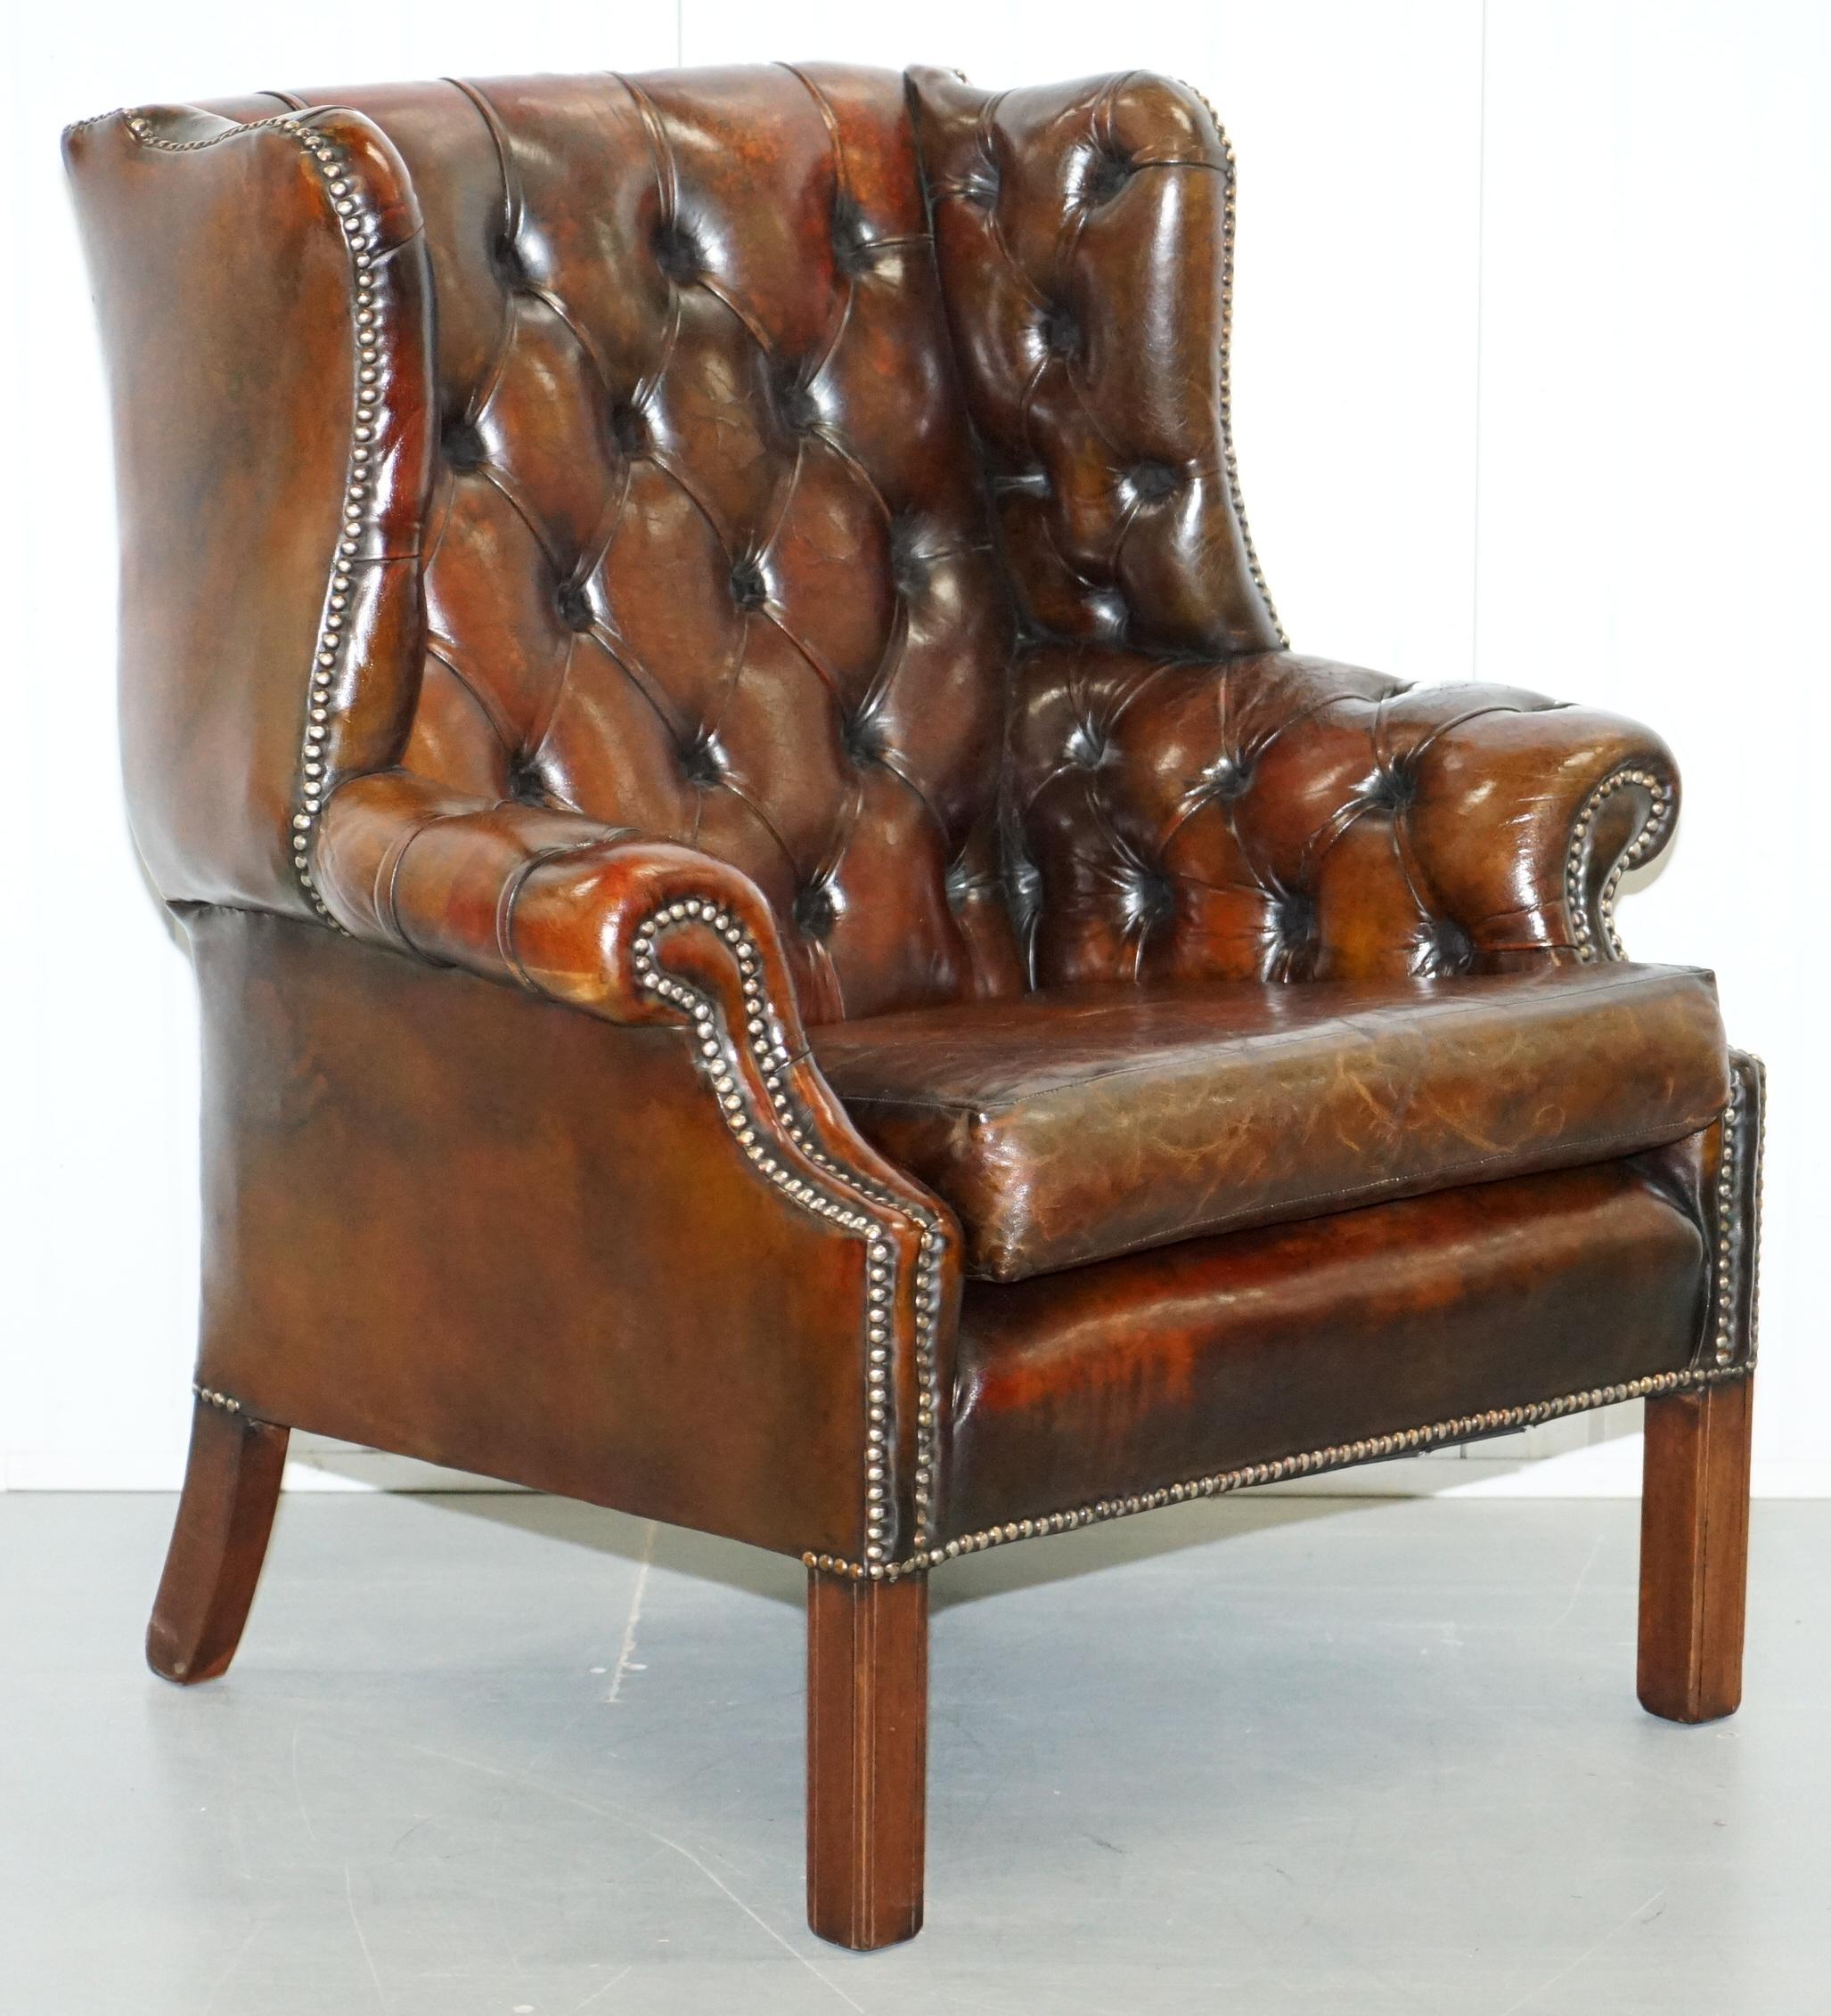 We are delighted to offer for sale this lovely midcentury restored Chesterfield wingback armchair and footstool in brown leather upholstery

A lovely pair, full of vintage charm and character, we have restored them to include having the old colour